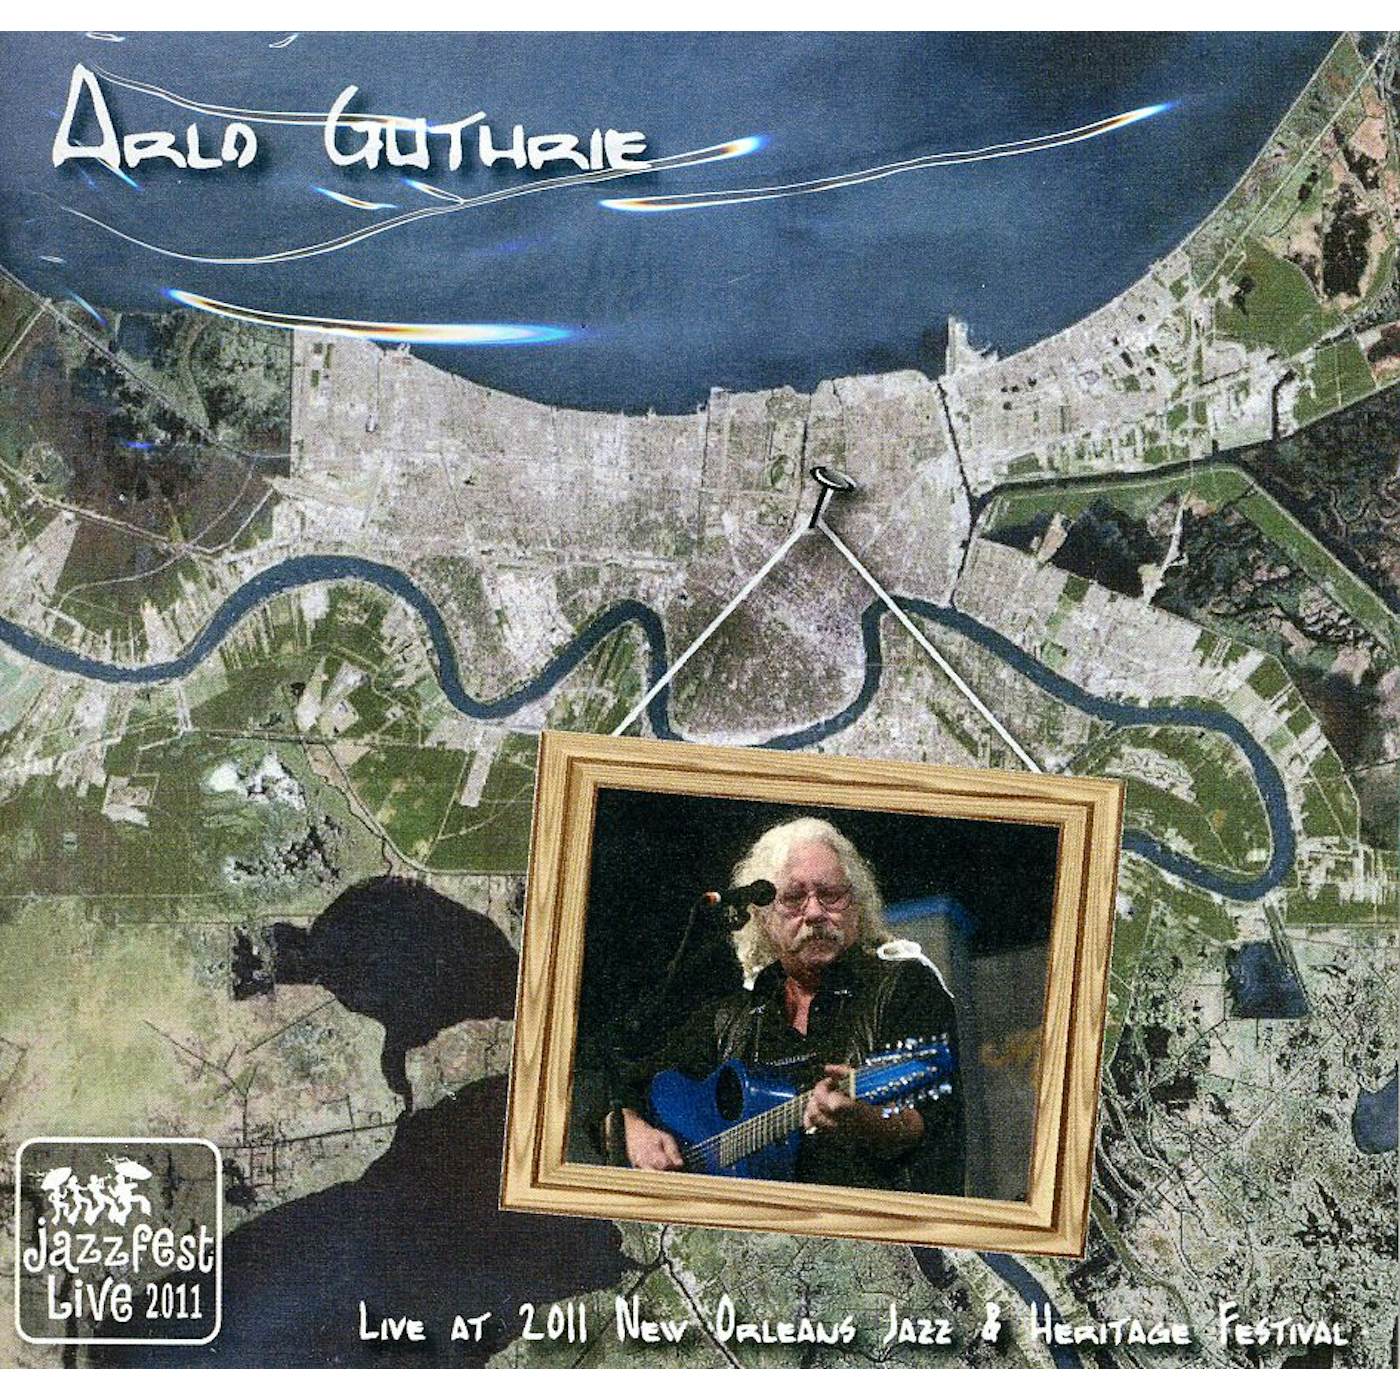 Arlo Guthrie LIVE AT JAZZ FEST 2011 CD